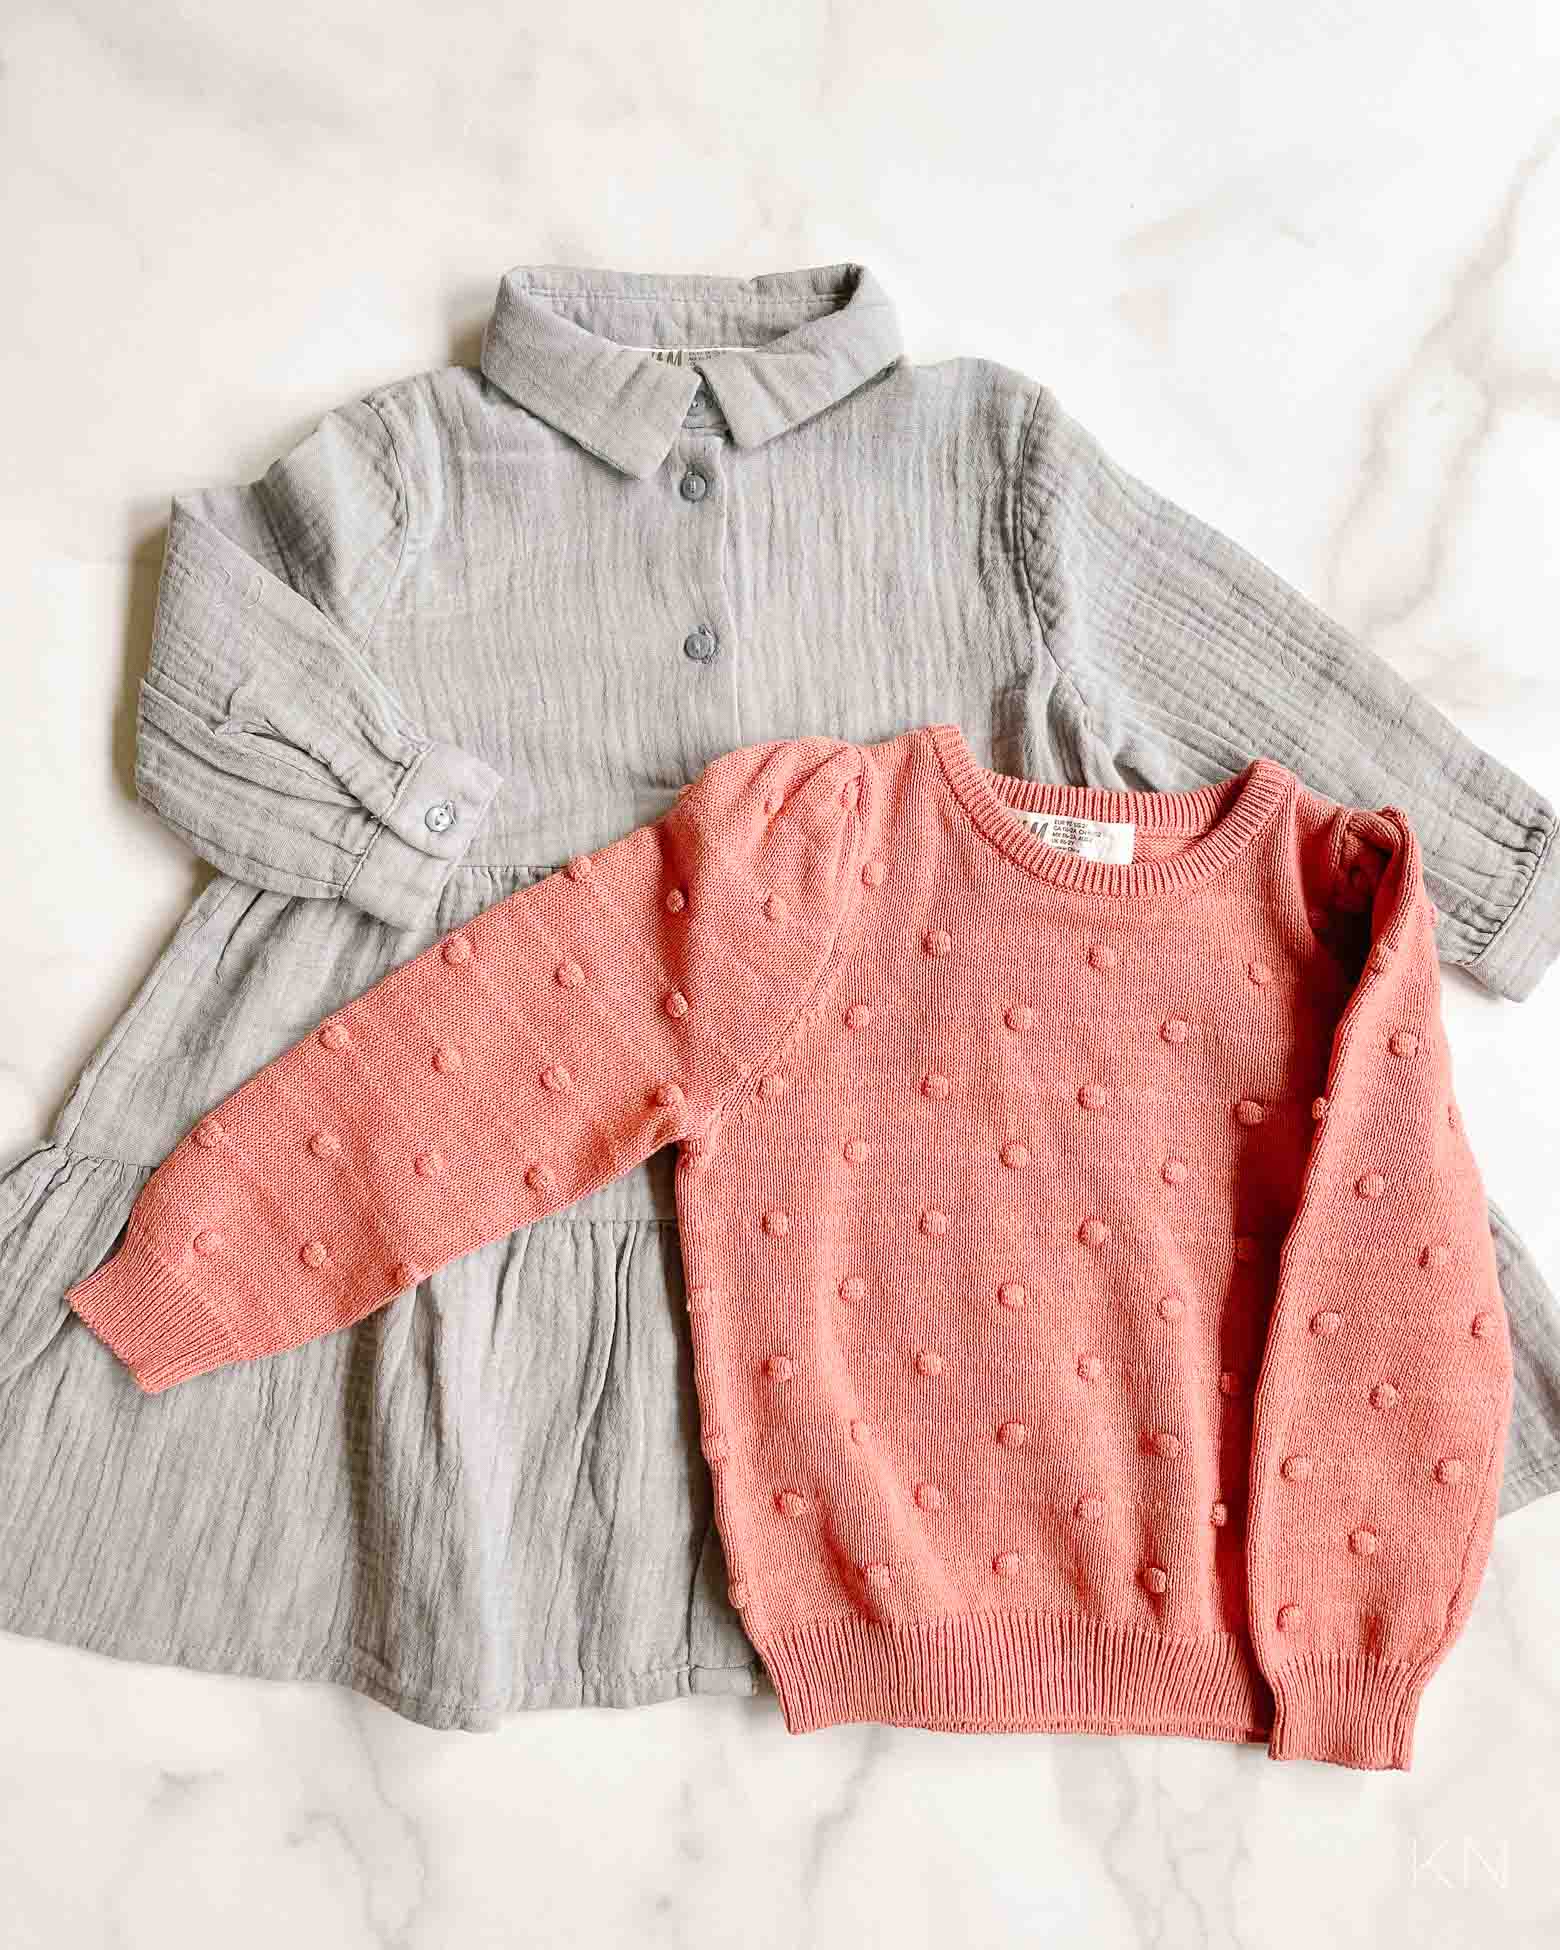 Toddler Fall Fashion from H&M